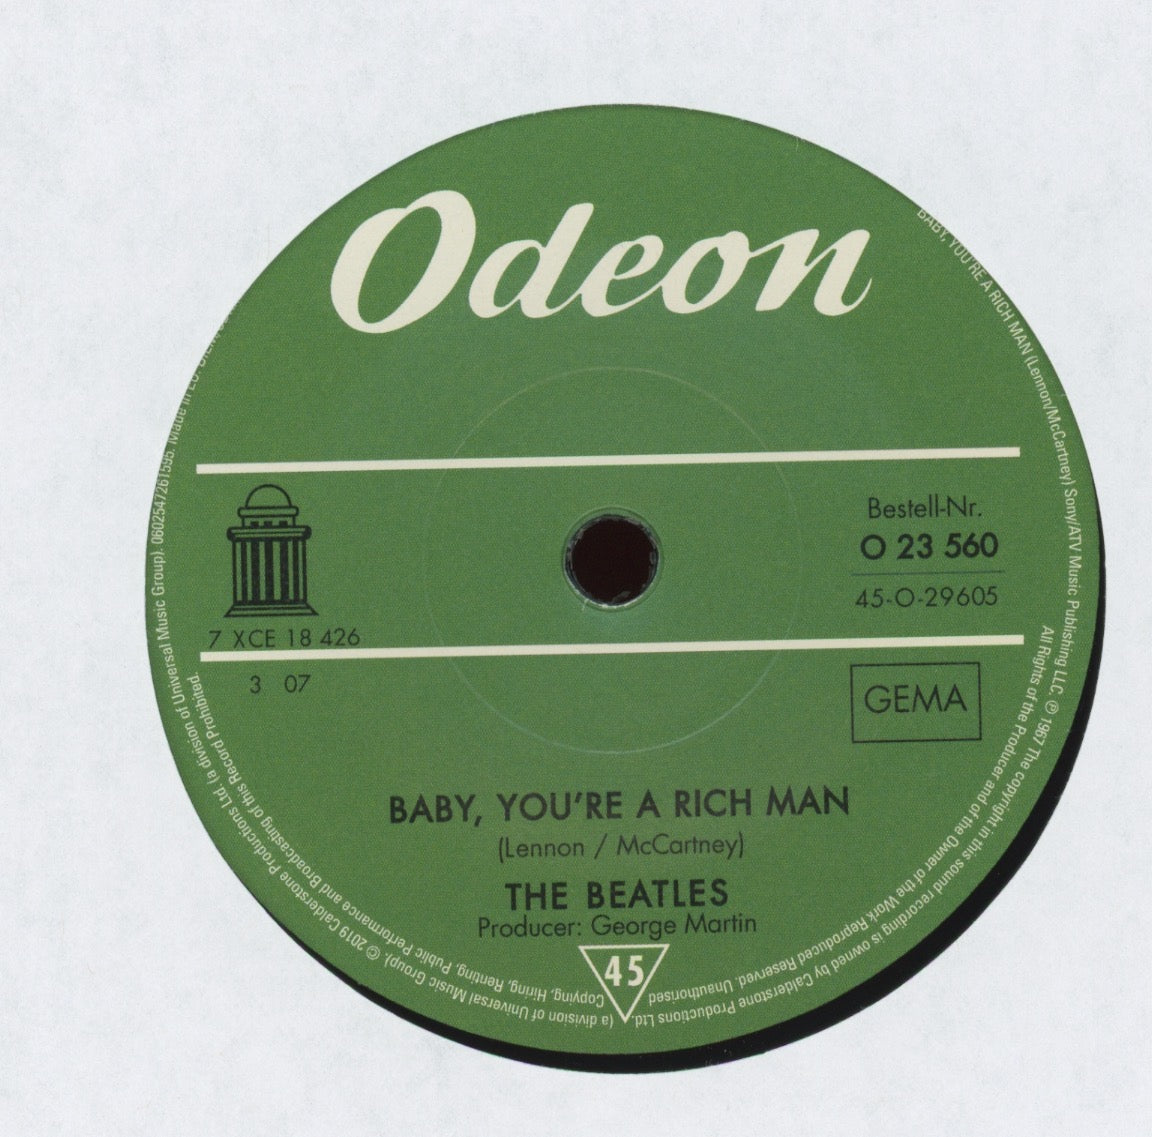 The Beatles - All You Need Is Love / Baby You`re A Rich Man on Odeon 7" Reissue With Picture Cover